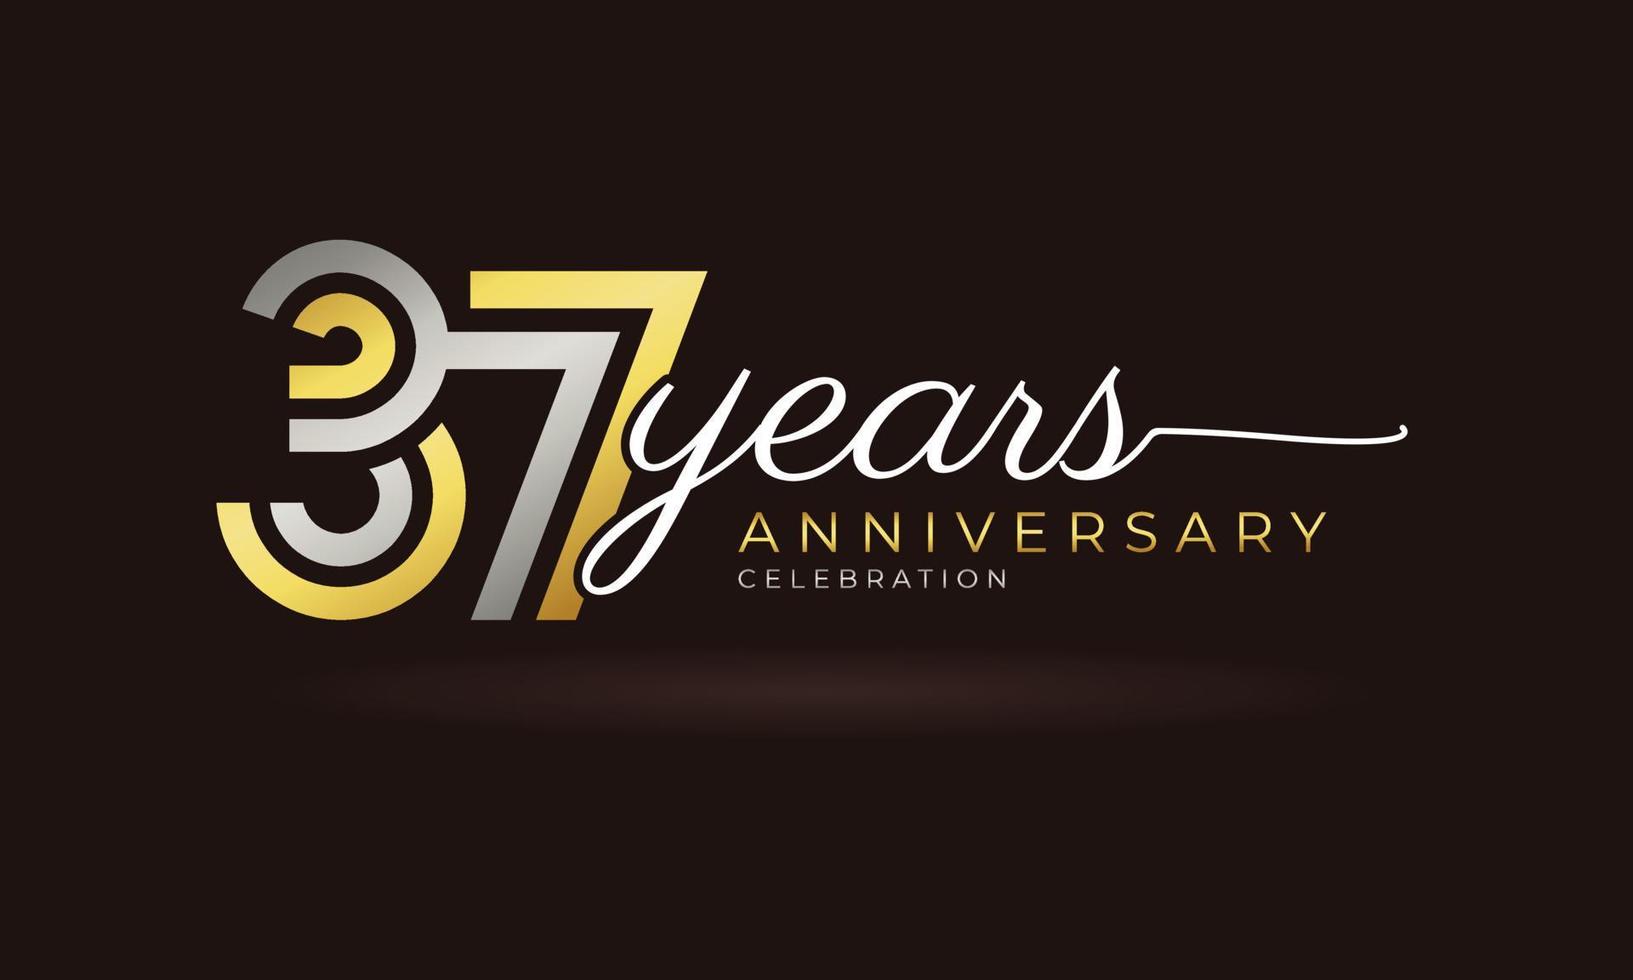 37 Year Anniversary Celebration Logotype with Linked Multiple Line Silver and Golden Color for Celebration Event, Wedding, Greeting Card, and Invitation Isolated on Dark Background vector